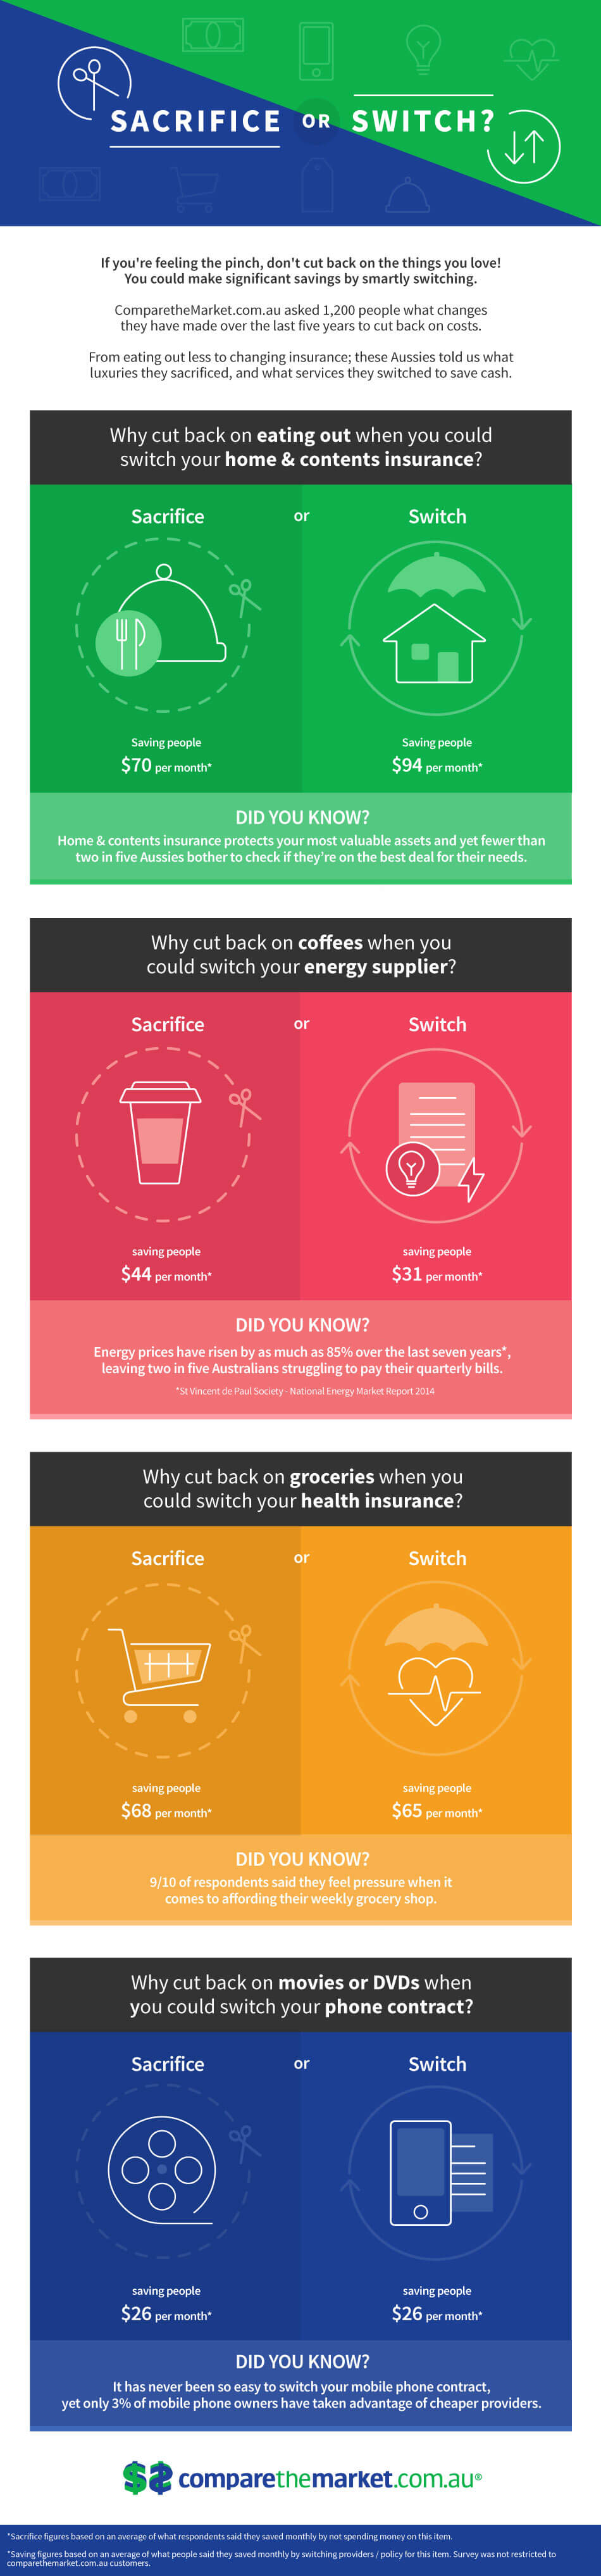 sacrifice or switch infographic